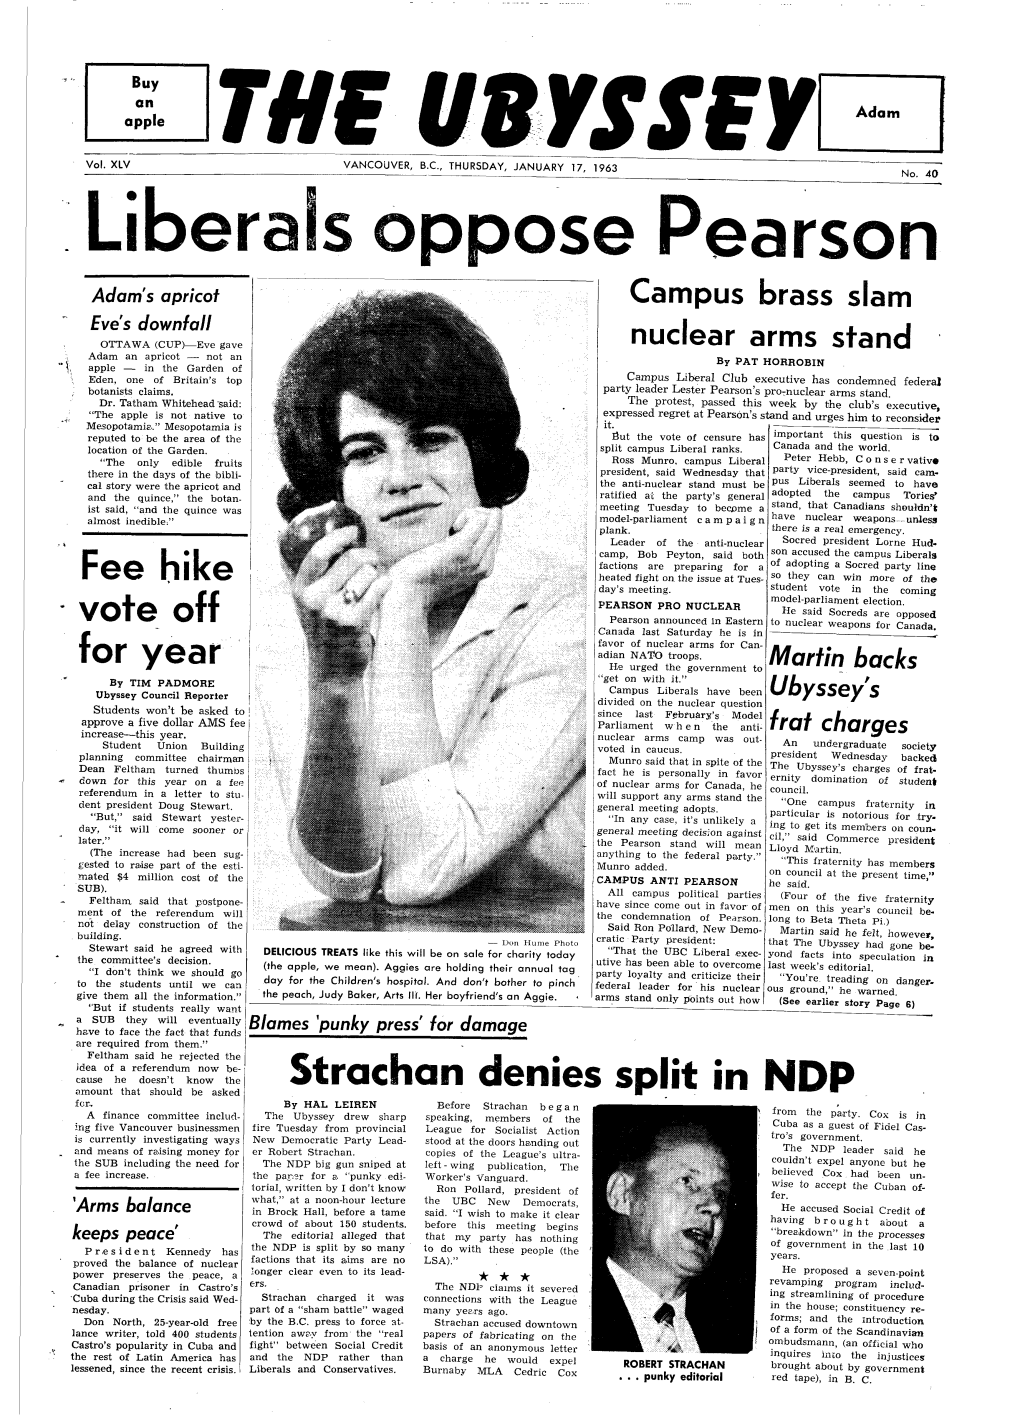 Liberals Oppose Pearson